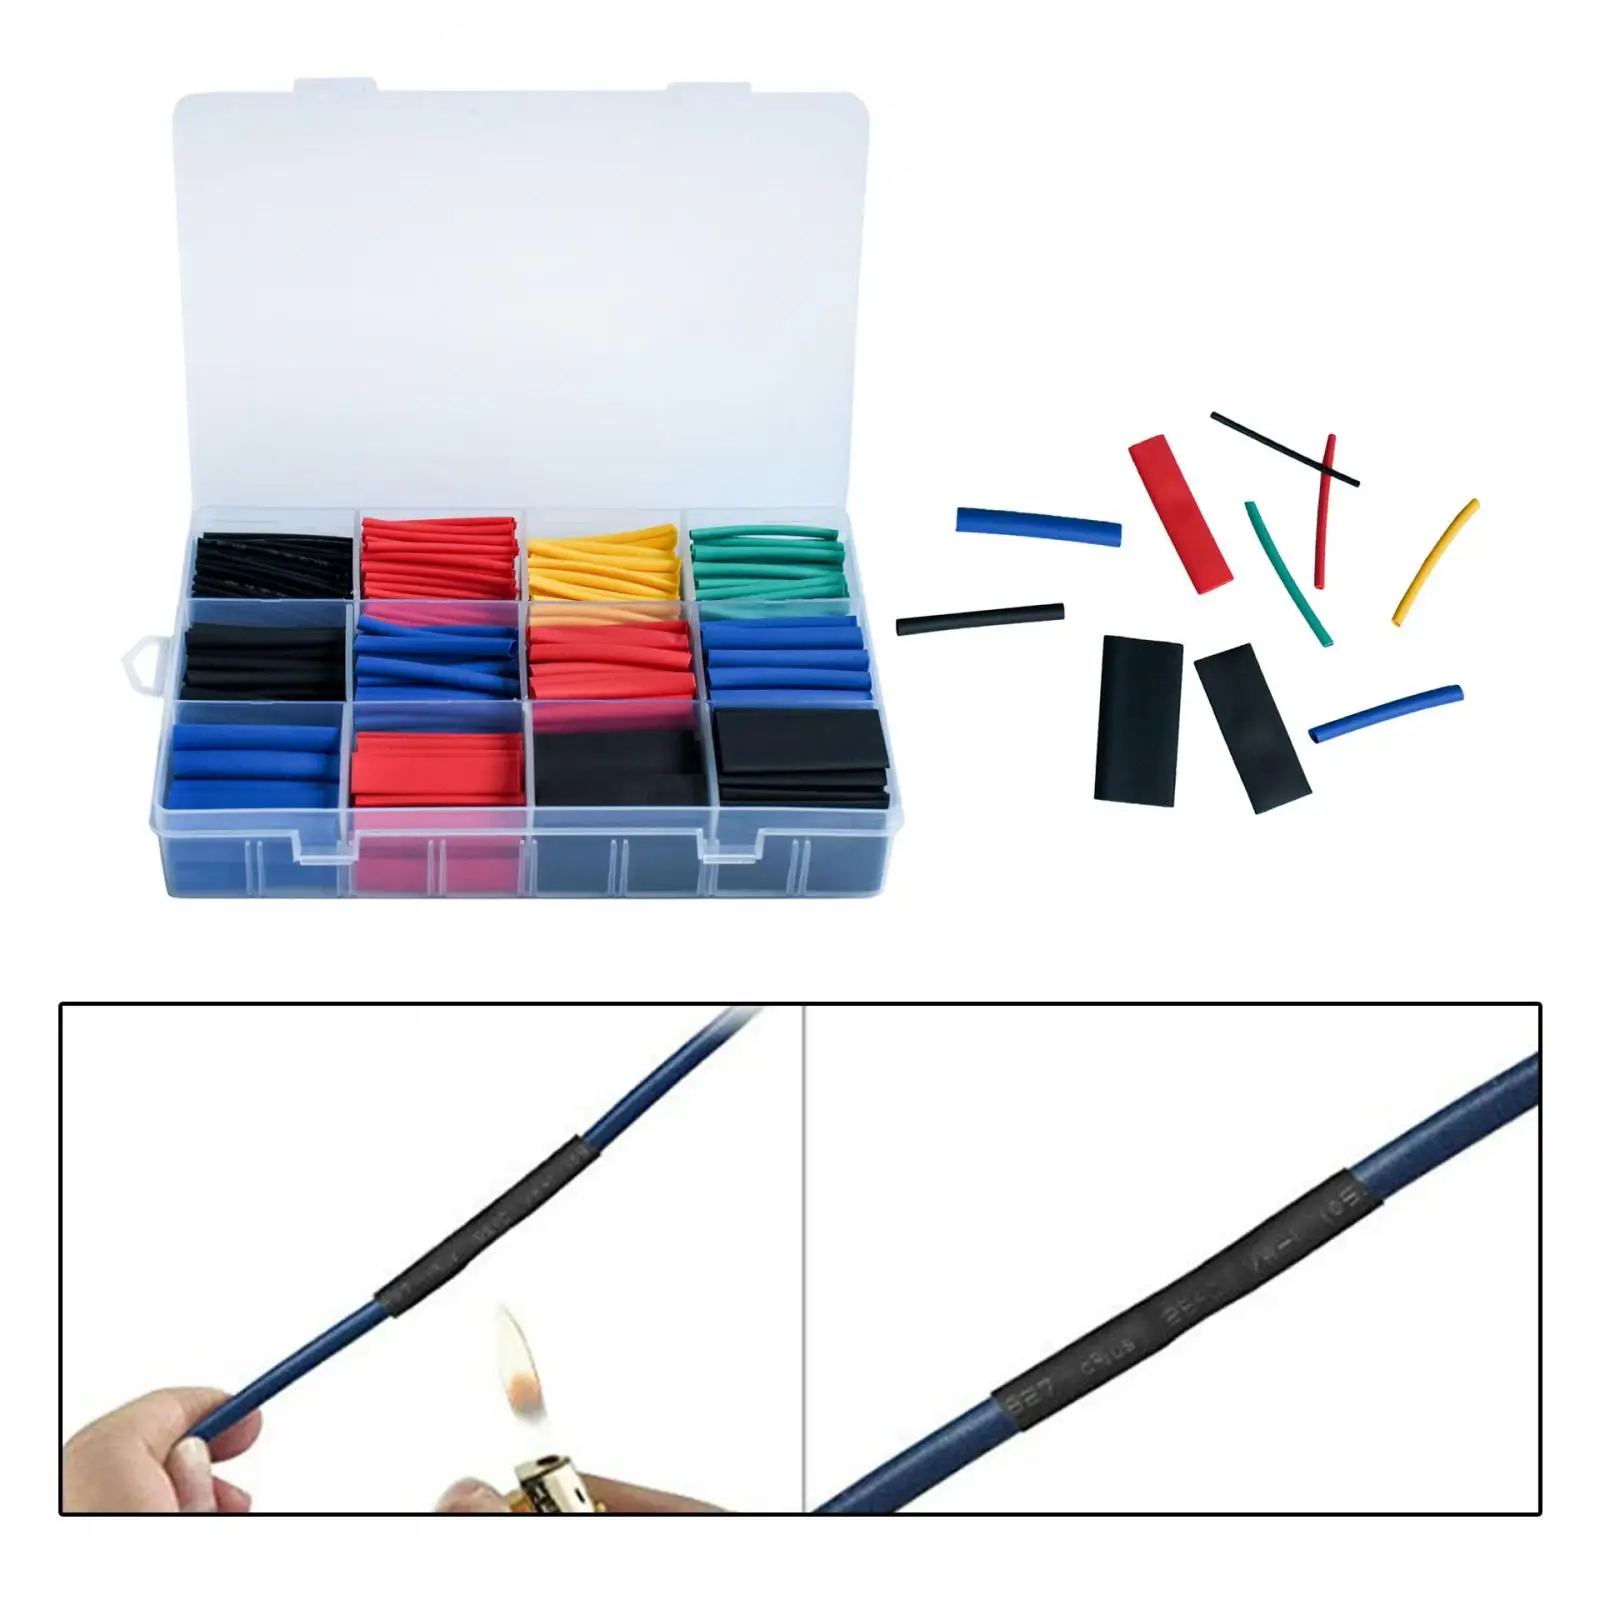 750x Heat Shrink Tubing Tubes Kit Insulation Protection with Storage Case